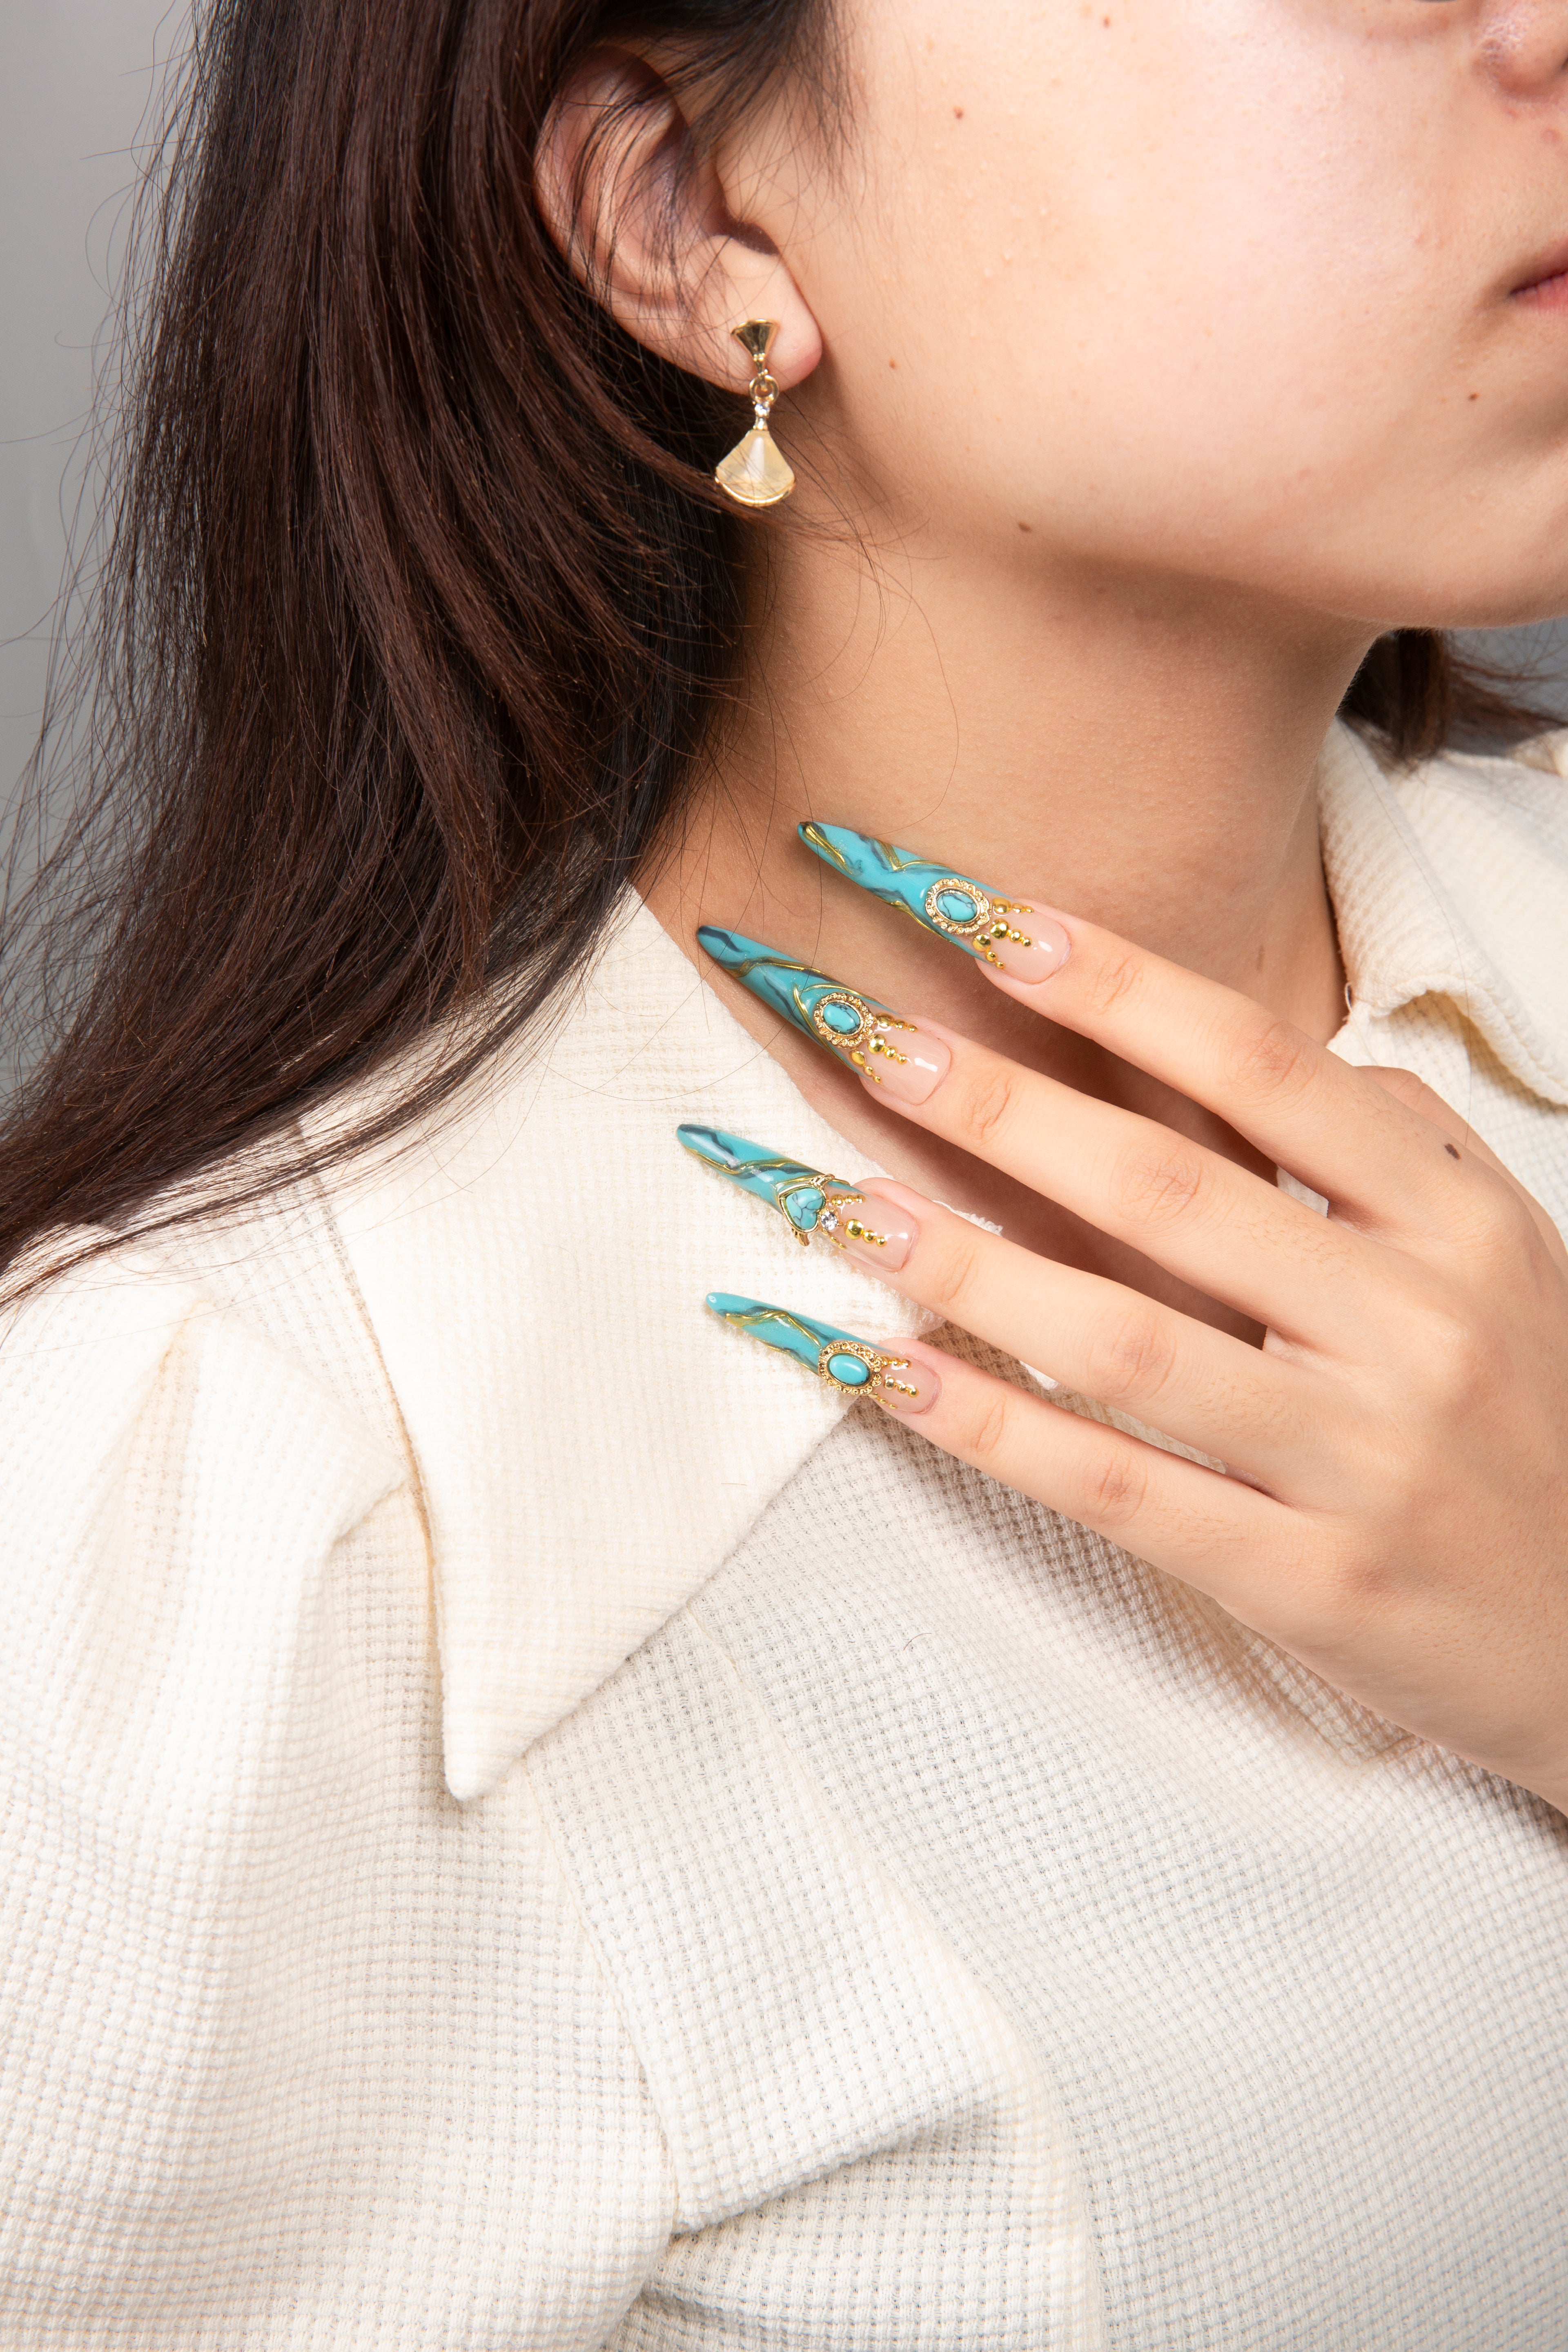 Close-up of woman's hand with Lovful's H122 Turquoise press-on nails, featuring turquoise nails with golden decor and sparkling gems, against a white textured blouse.